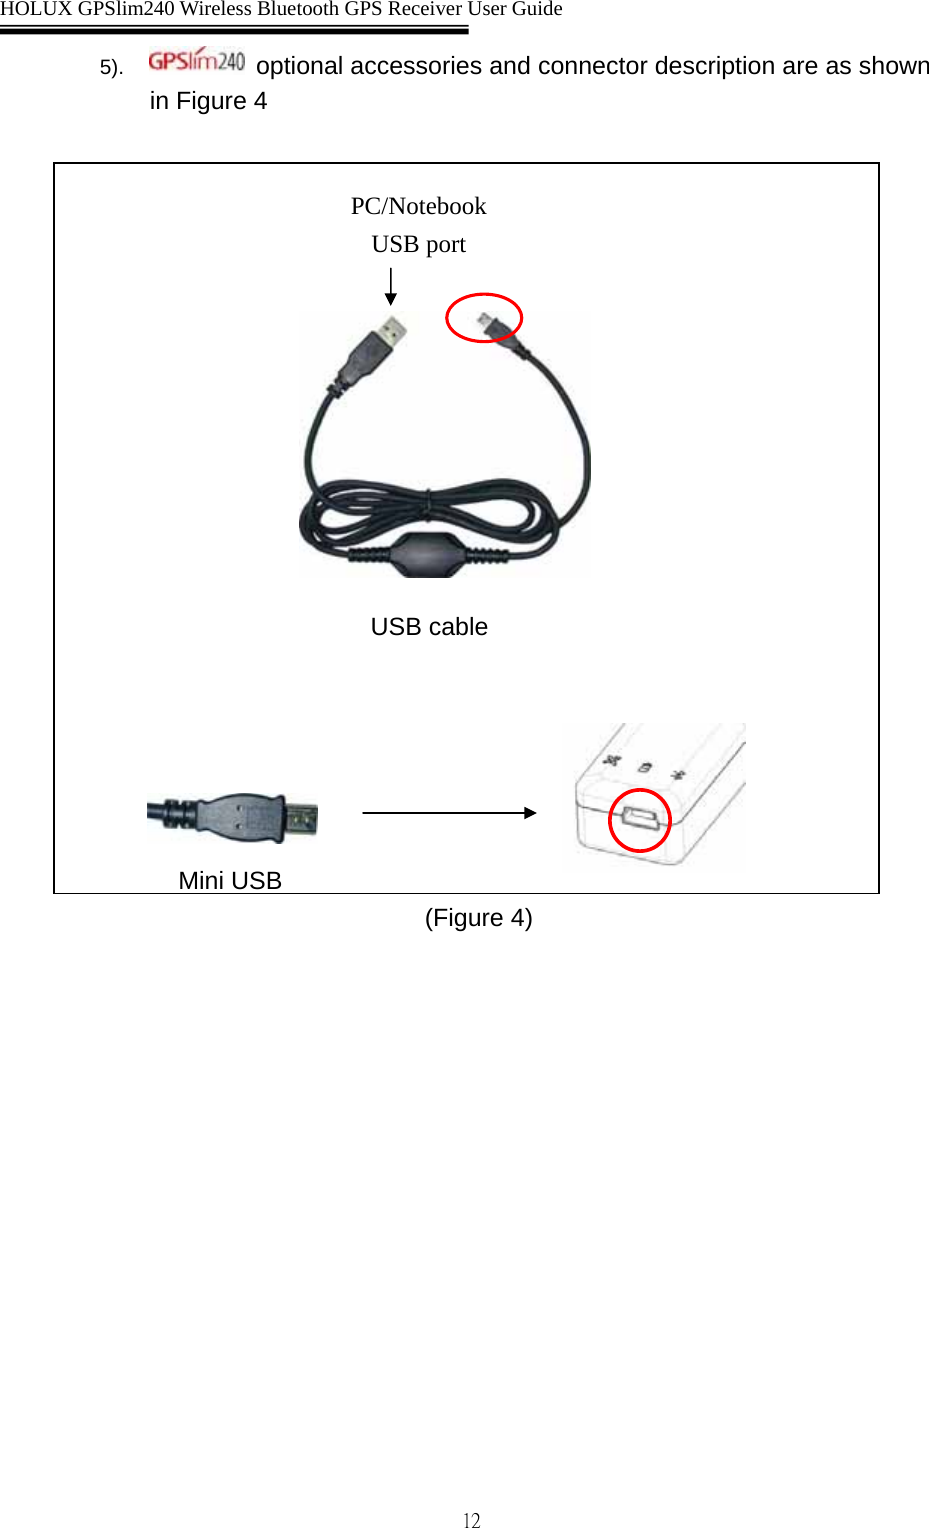  HOLUX GPSlim240 Wireless Bluetooth GPS Receiver User Guide   125).   optional accessories and connector description are as shown in Figure 4                                (Figure 4)   Mini USB   PC/Notebook USB port USB cable